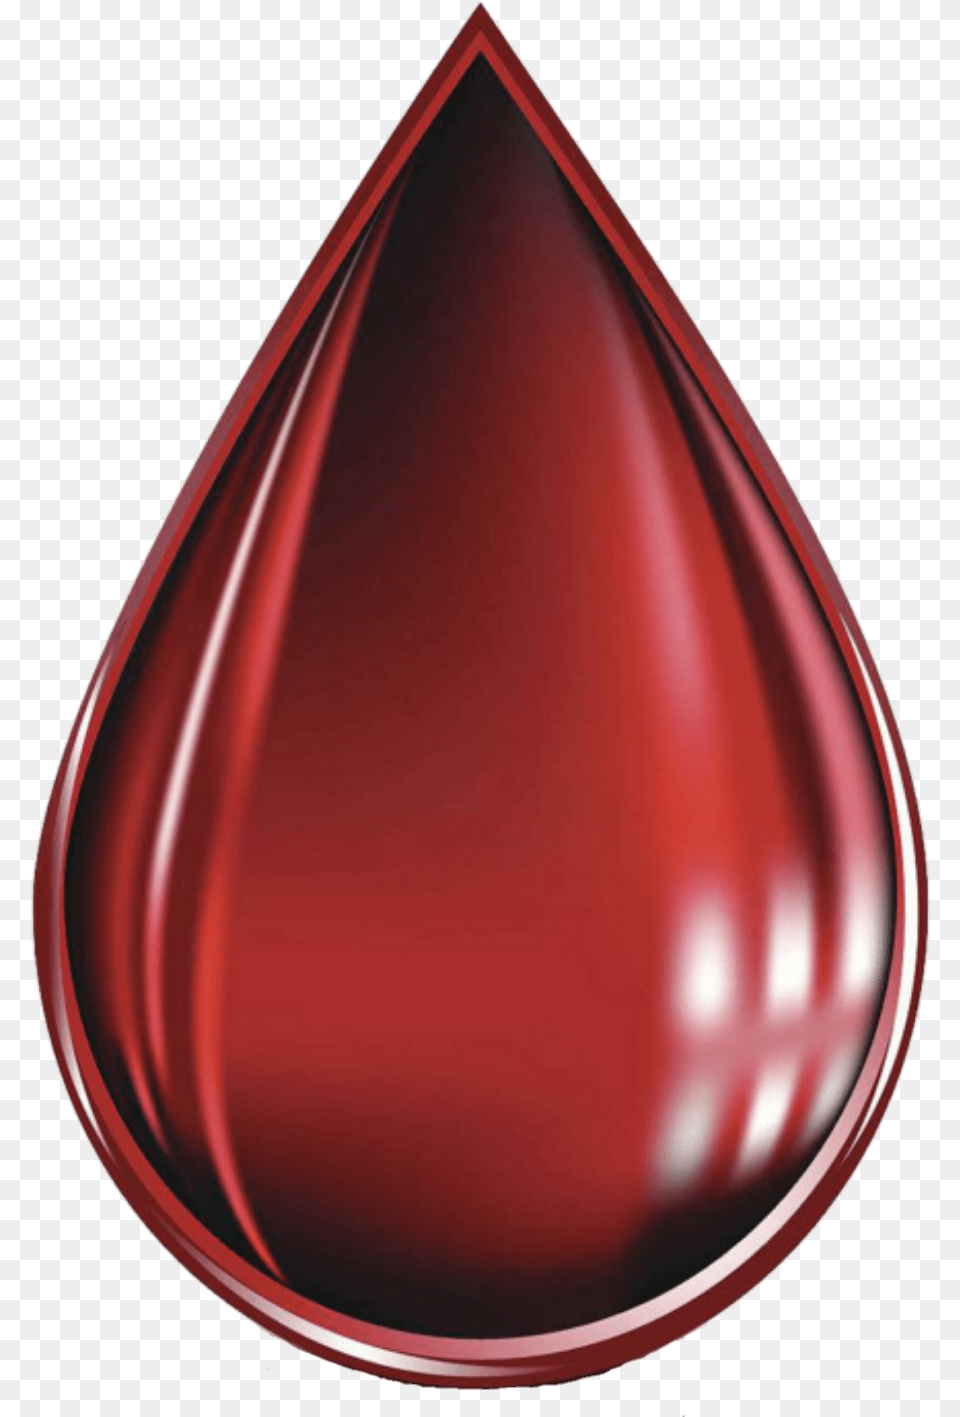 Transparent Realistic Blood Drip Egg Decorating, Droplet, Maroon Free Png